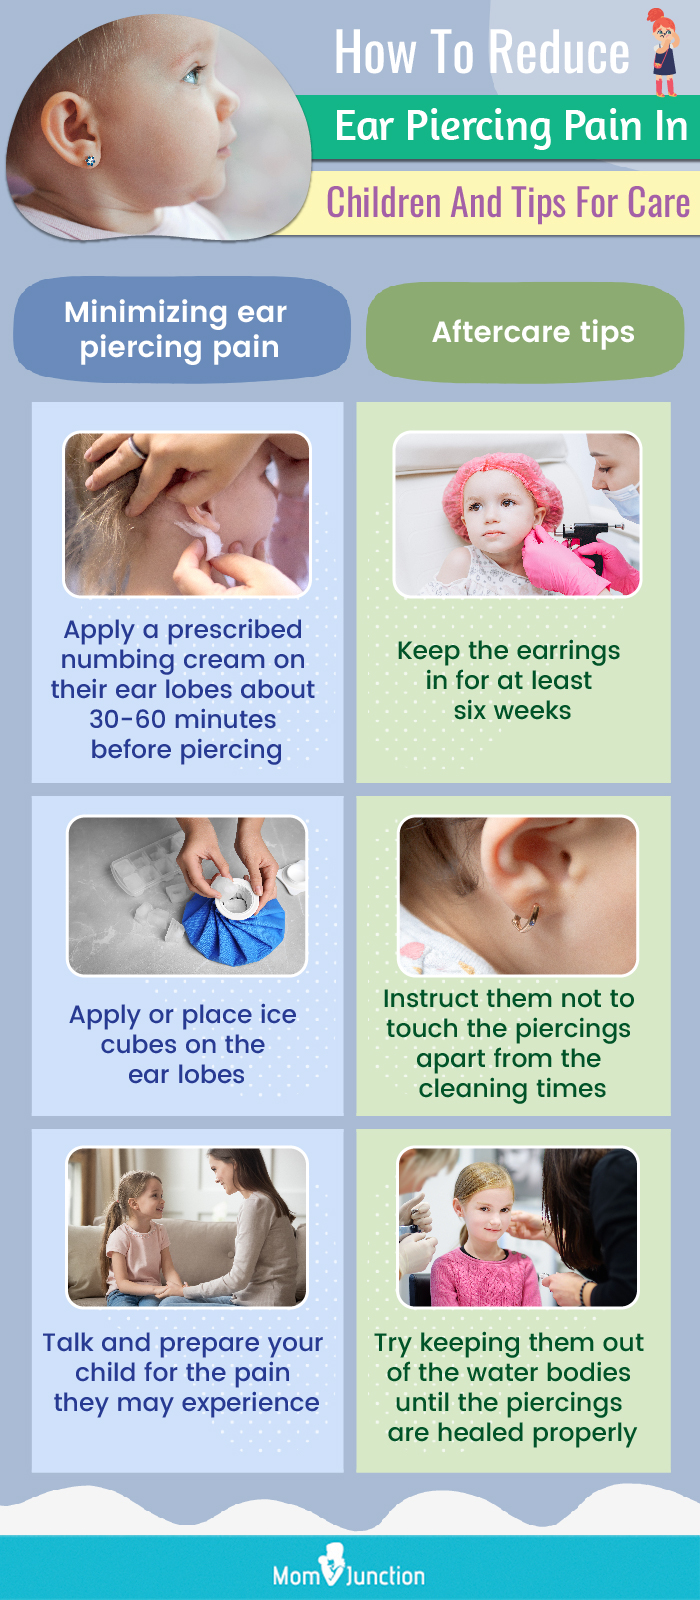 How To Reduce Ear Piercing Pain In Children Tips For Care